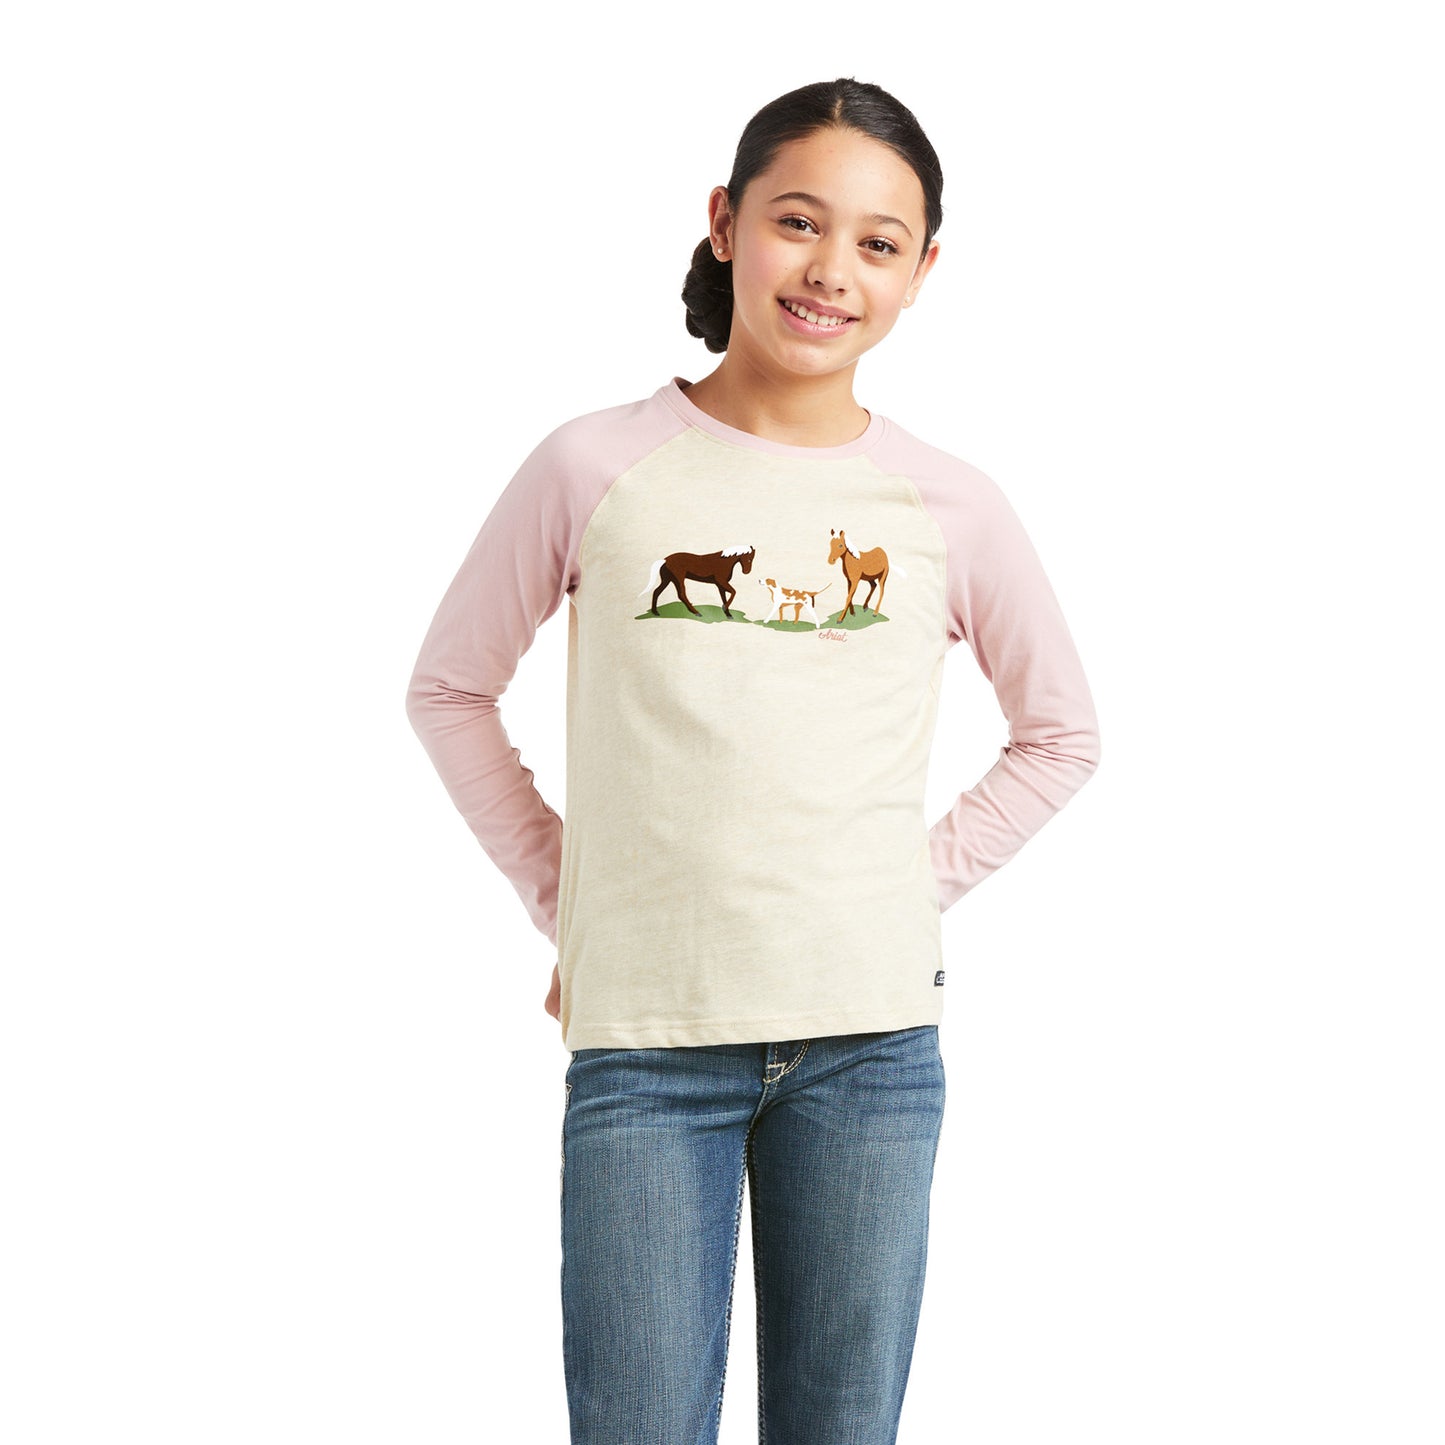 Ariat Youth Girls Pasture Oatmeal Heather Long-Sleeve T-Shirt 10037732